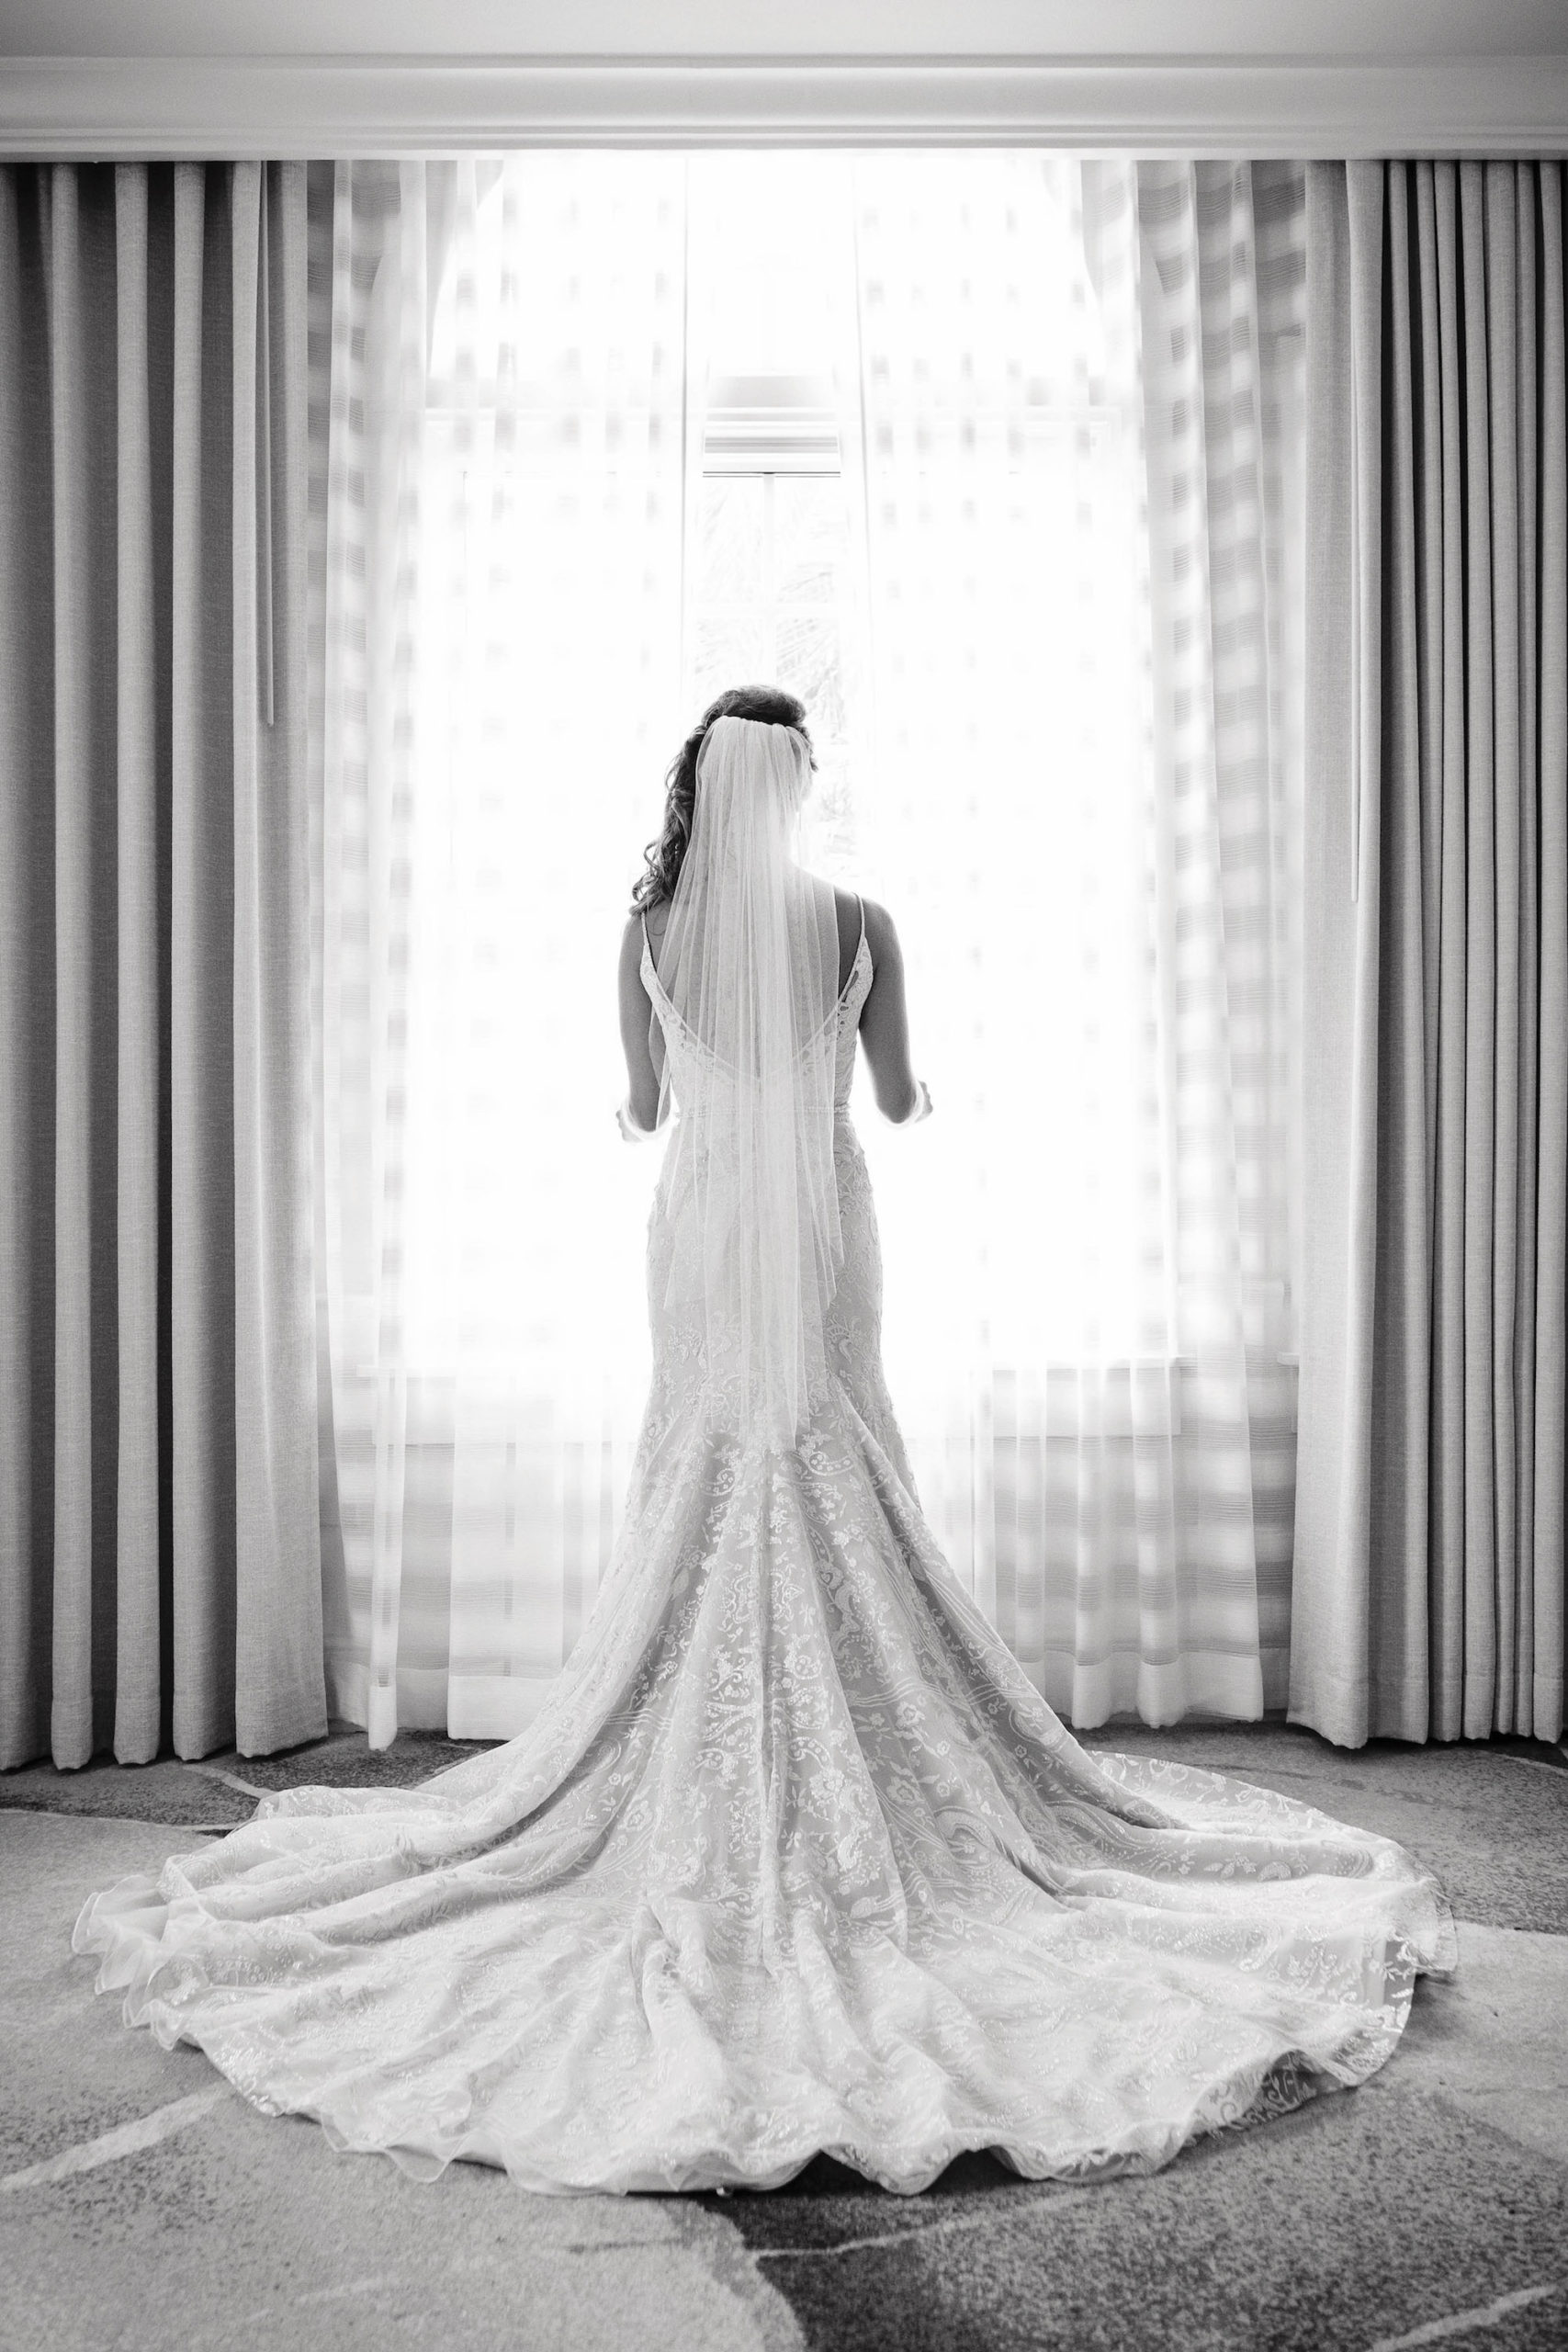 Florida Bridal Portrait Looking Out the Window, Hayley Paige Wedding Dress, Black and White Symmetrical | Tampa Bay Beachfront Resort The Don CeSar Hotel